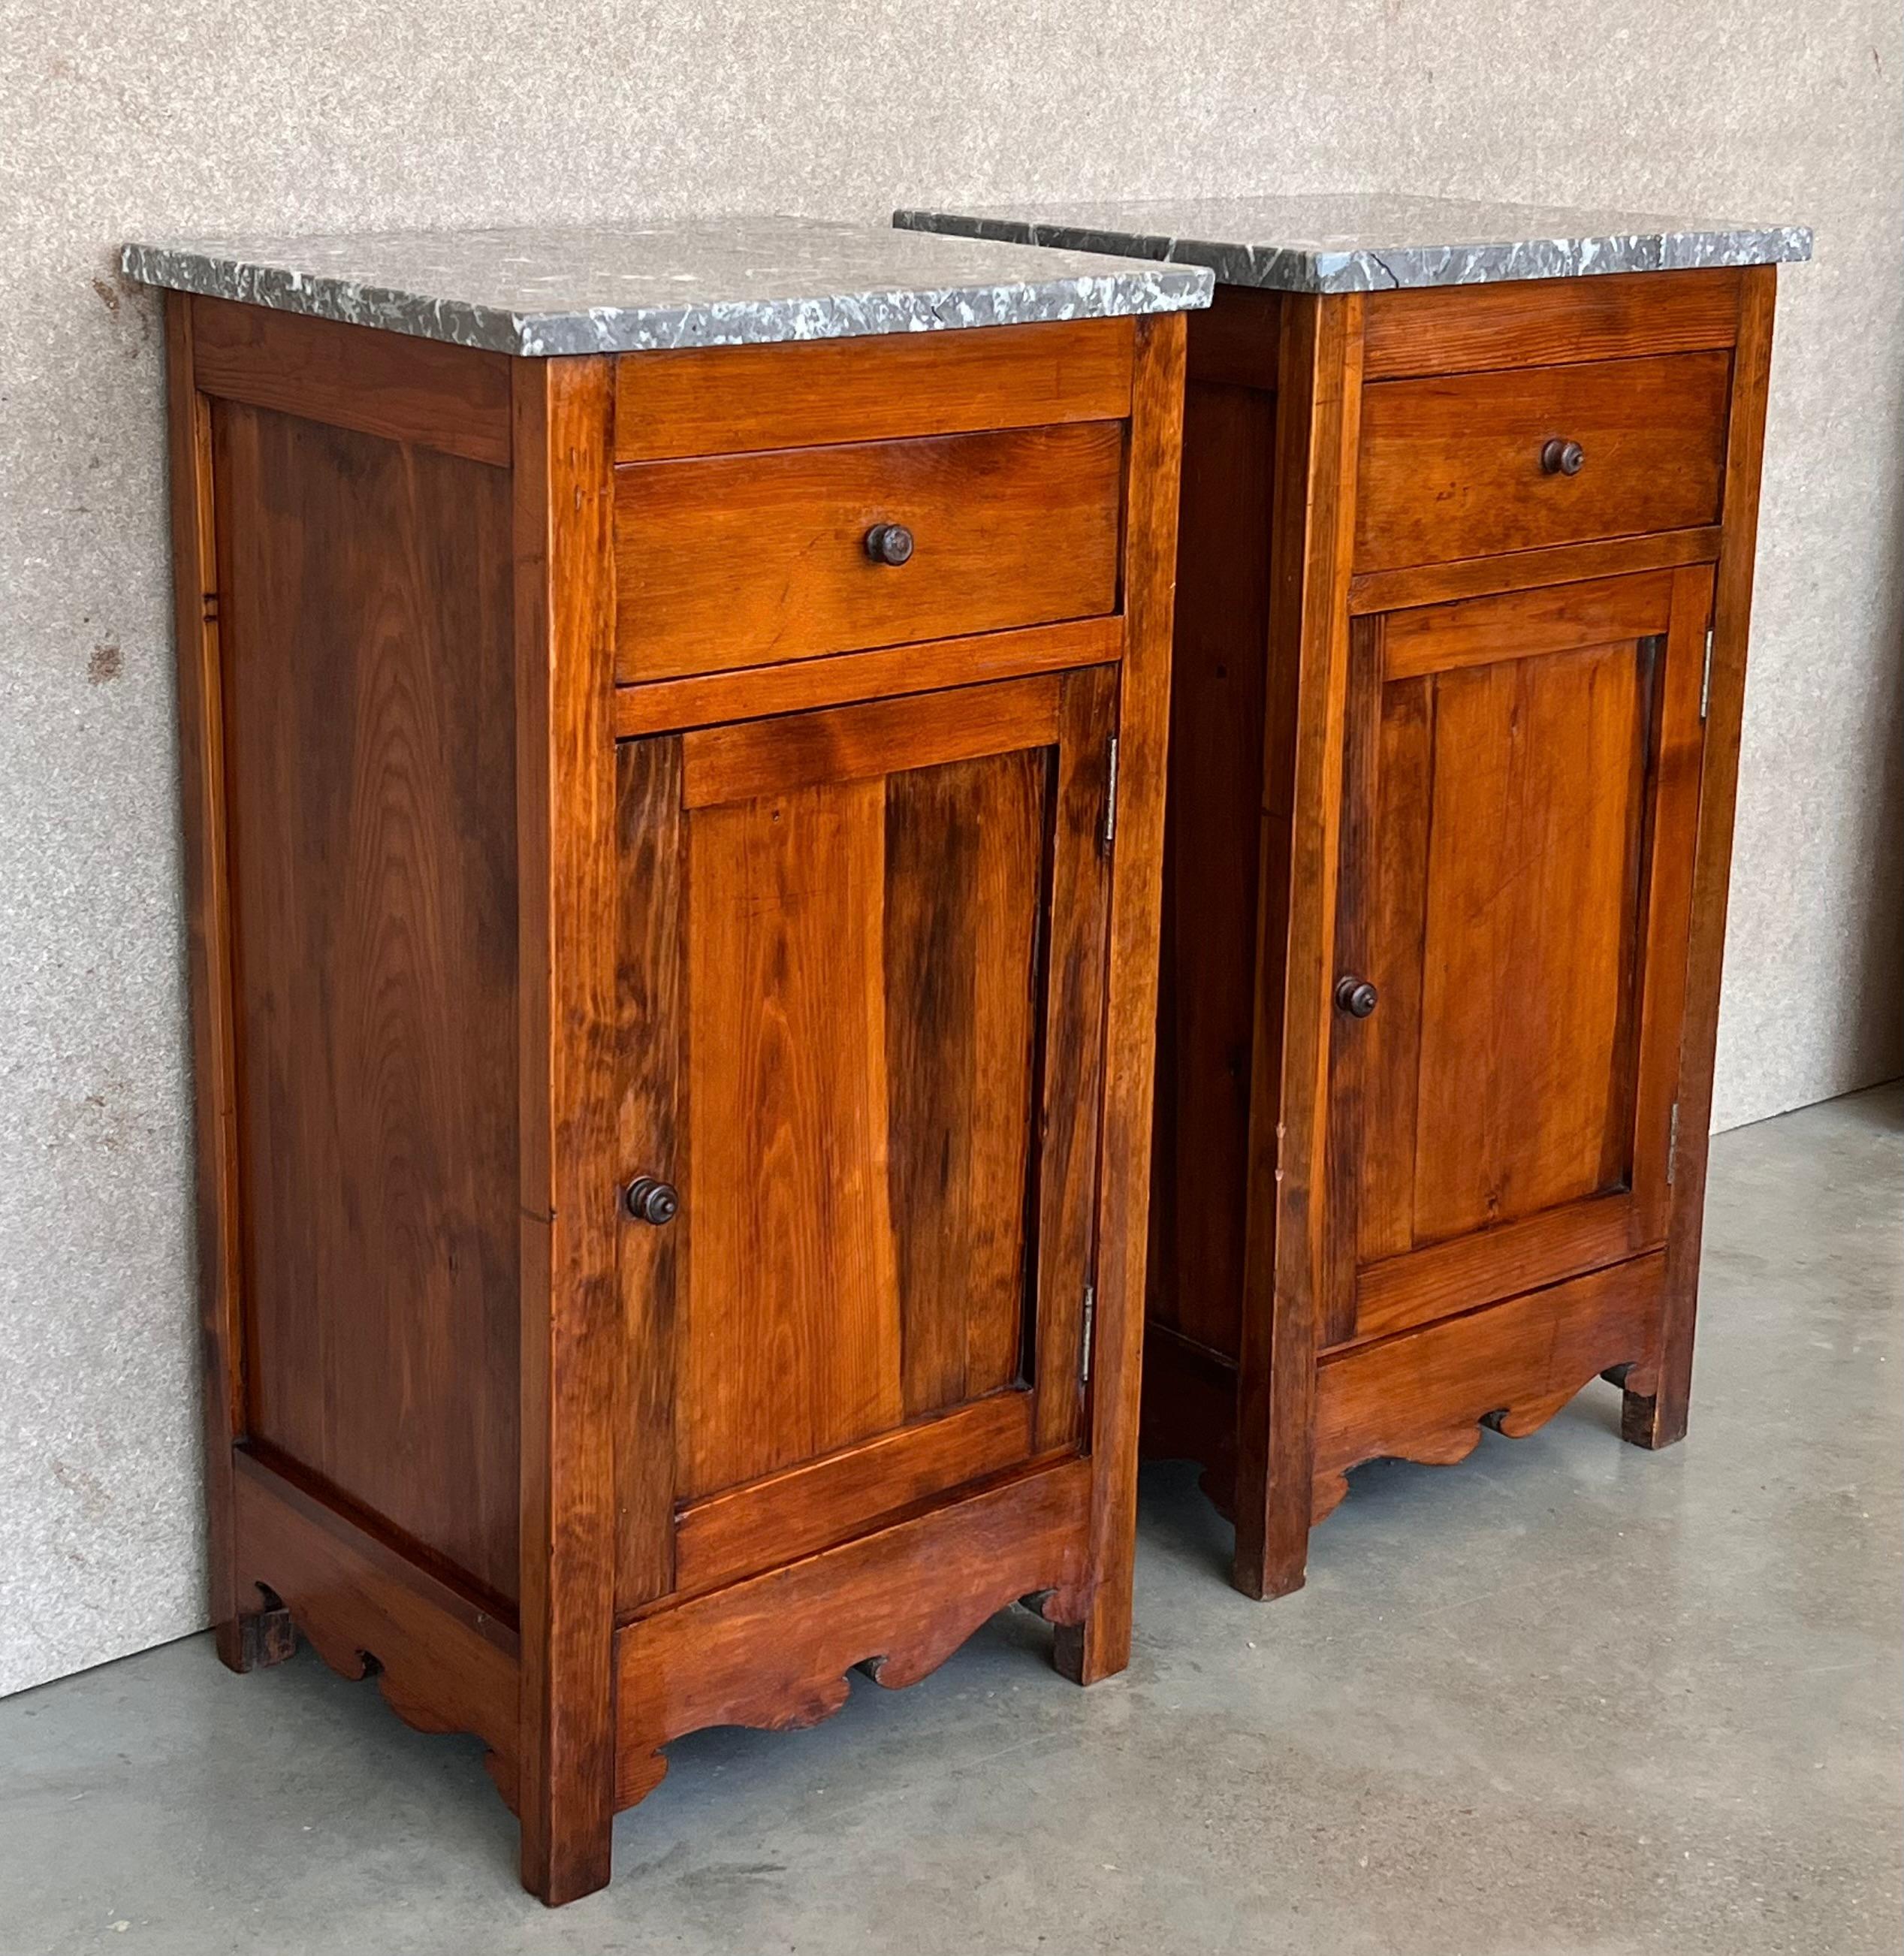 20th Century Pair of Biedermeier Nightstands with Marble Top, One-Drawer & Door In Good Condition For Sale In Miami, FL